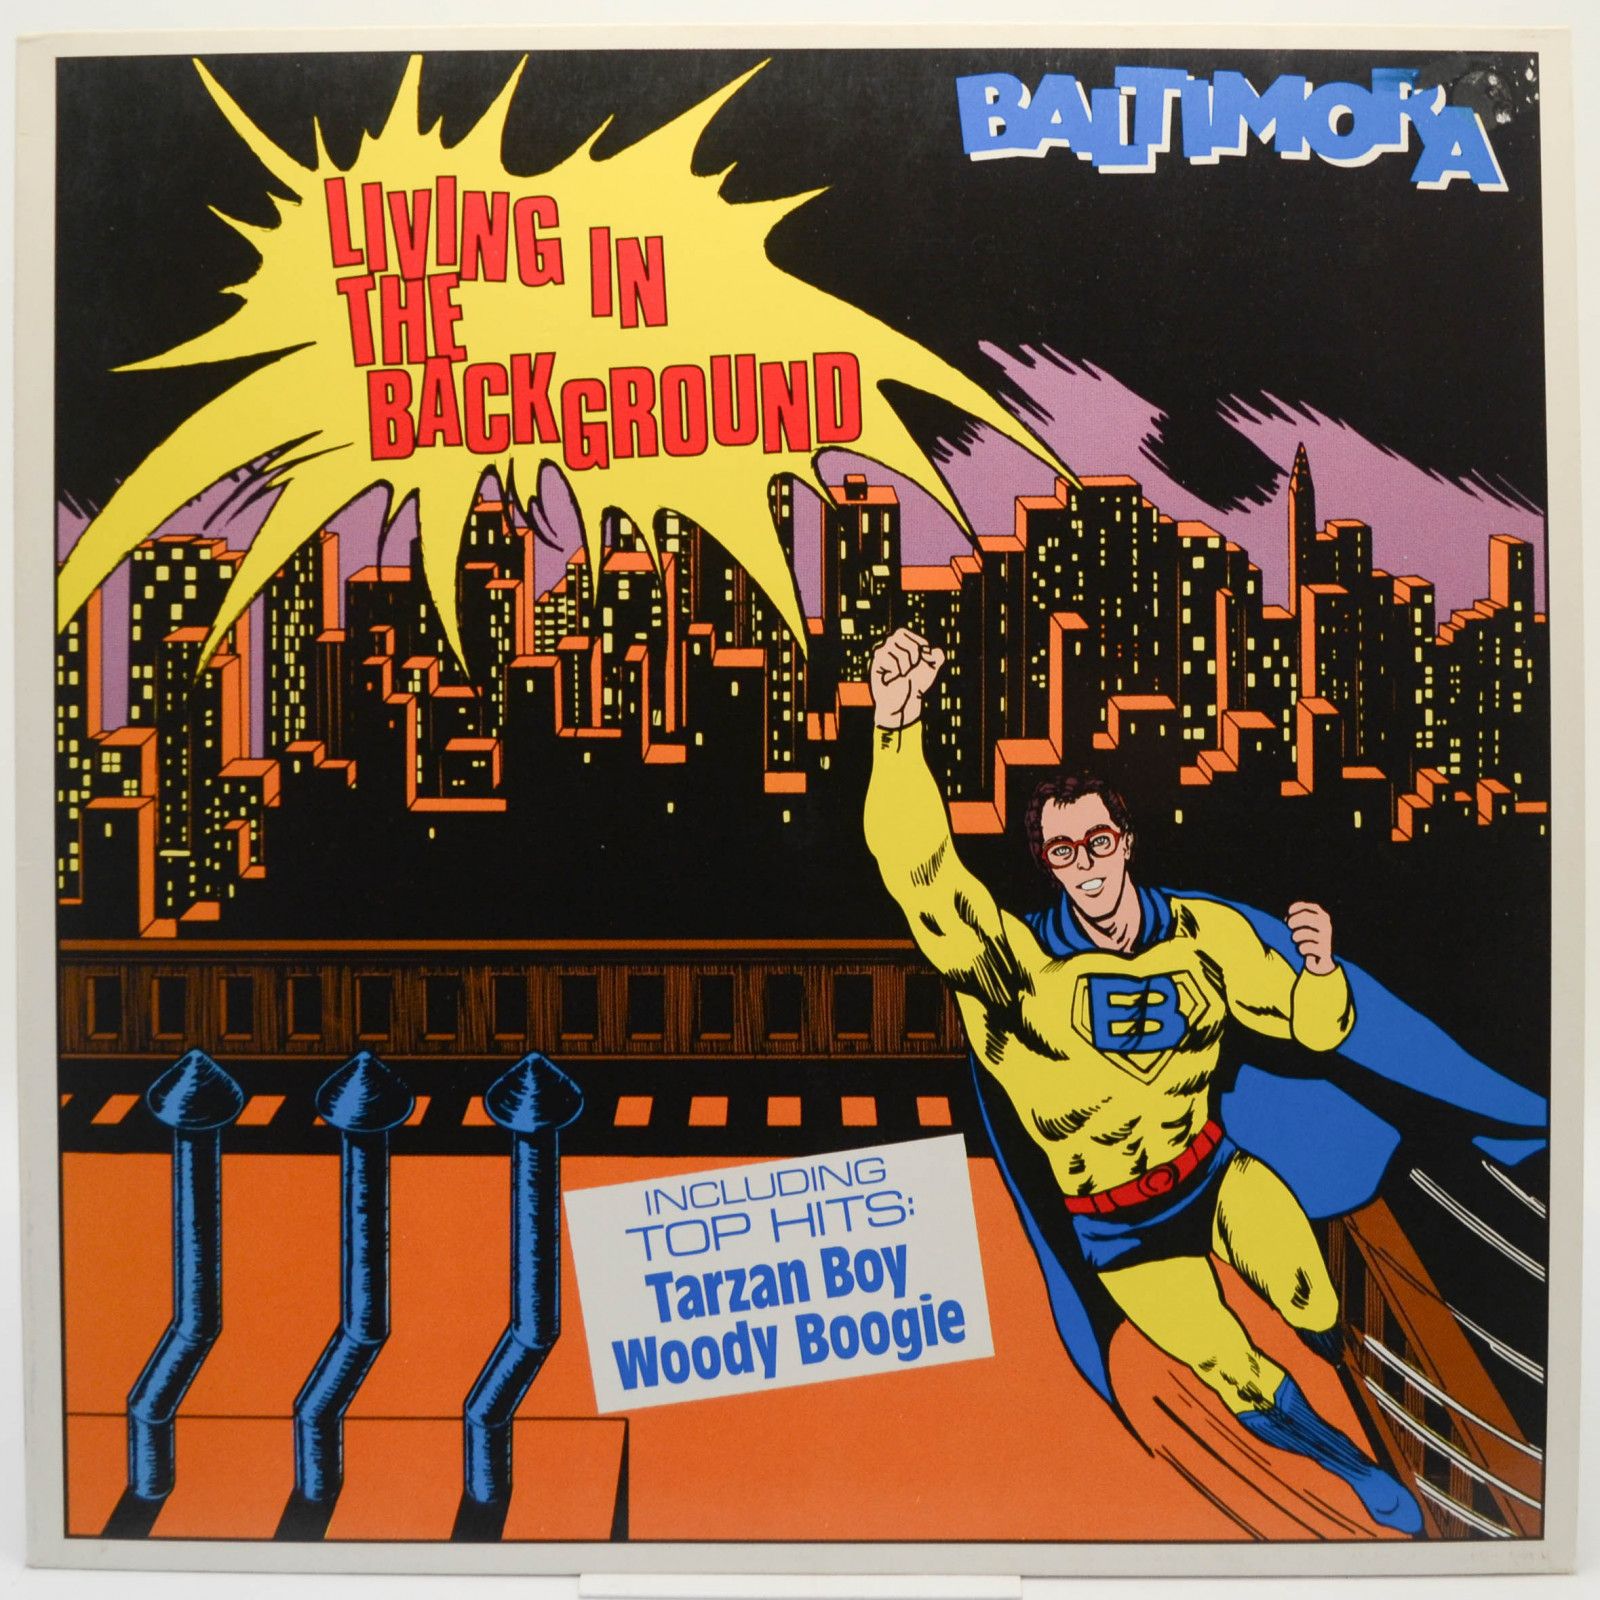 Baltimora — Living In The Background, 1985